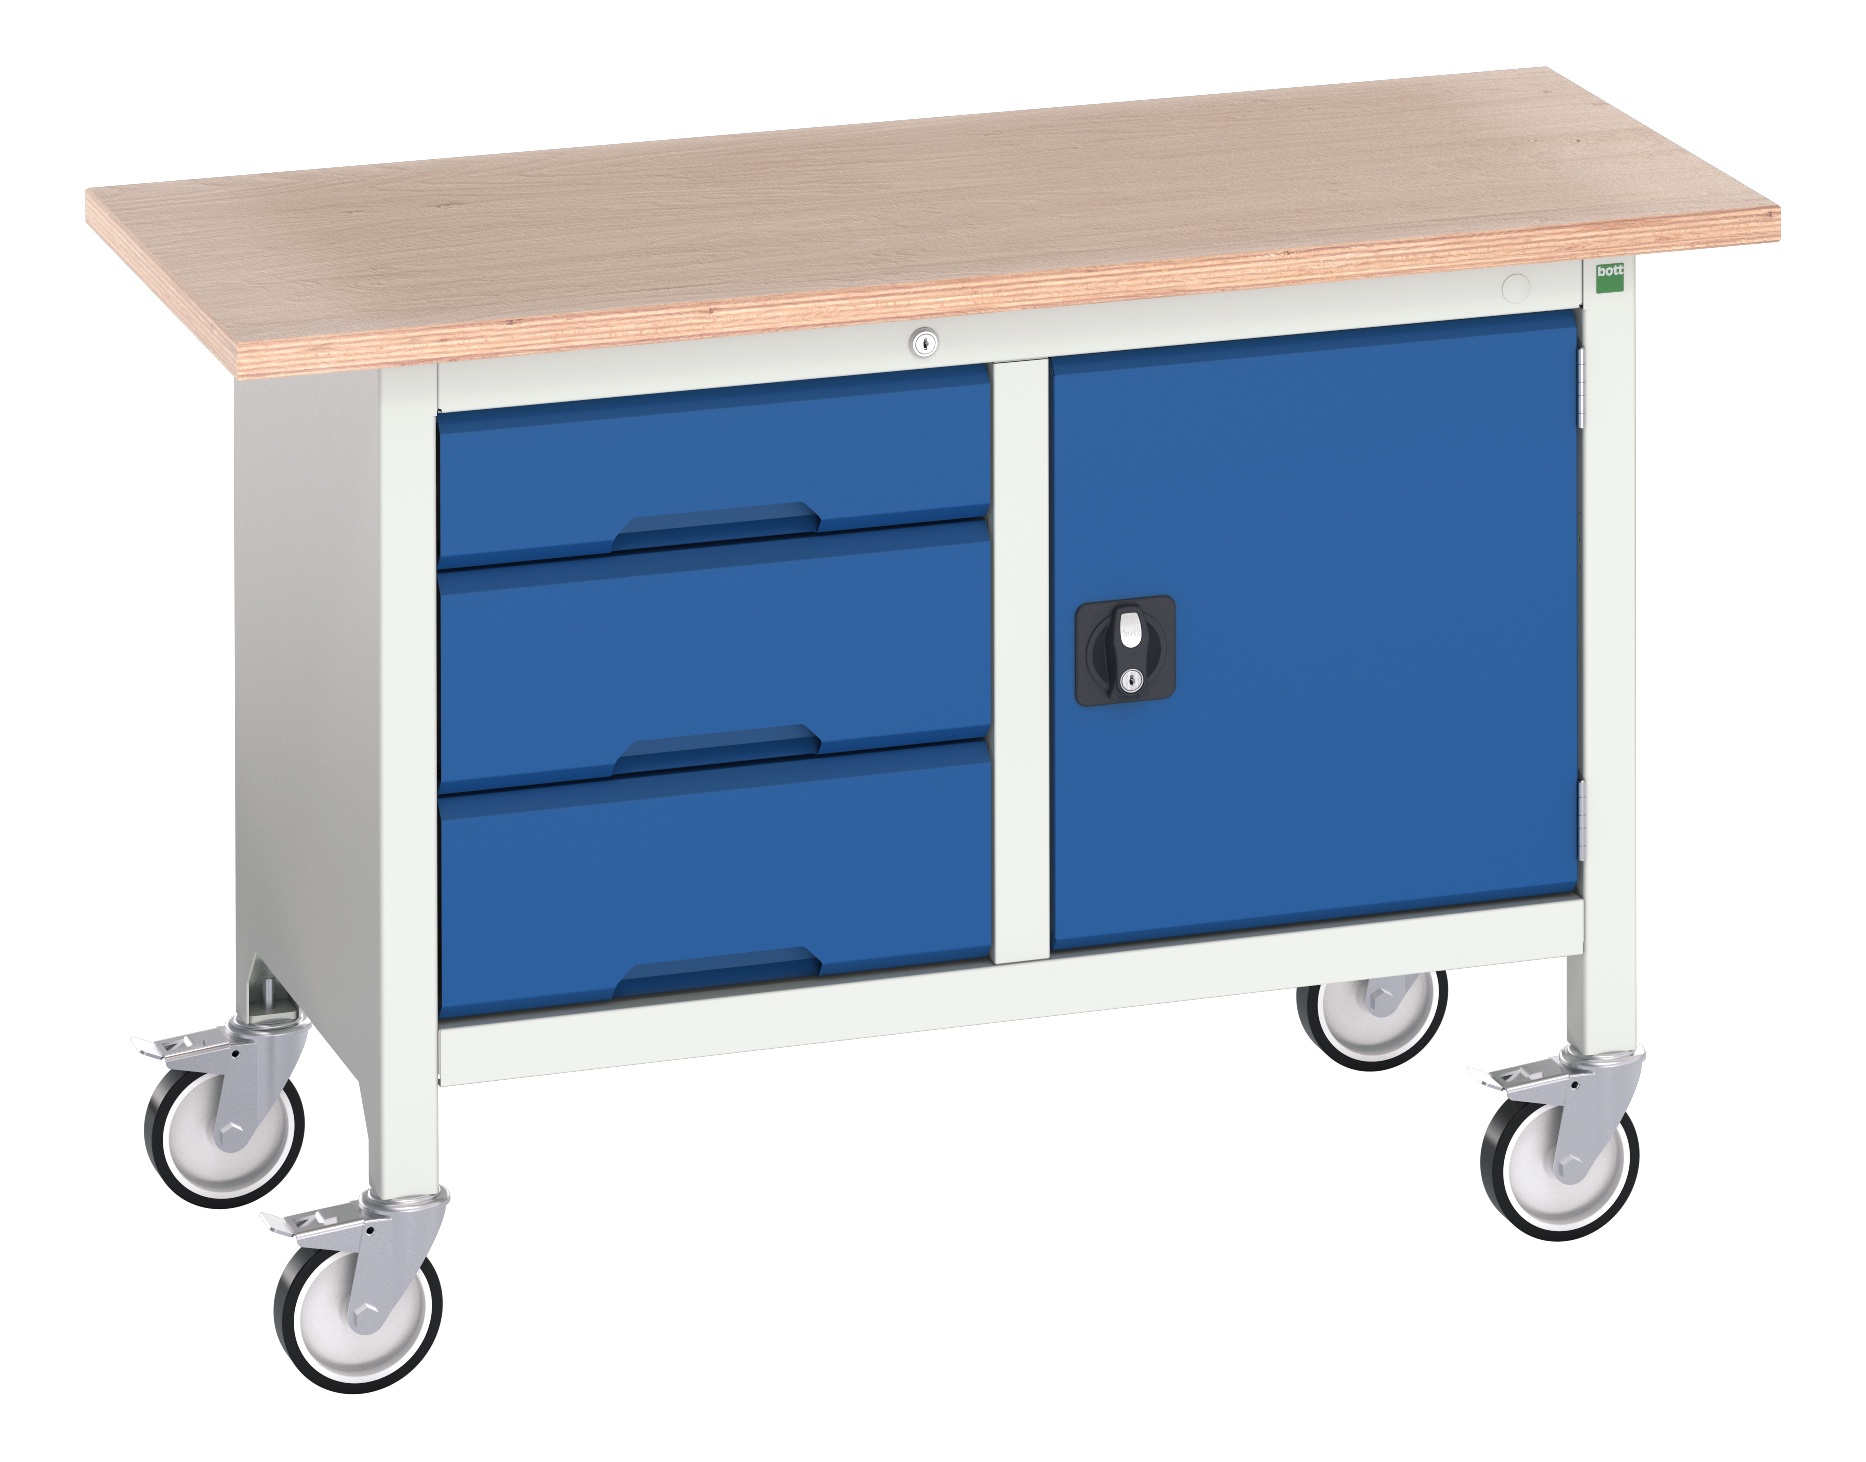 Bott Verso Mobile Storage Bench With 3 Drawer Cabinet / Full Cupboard - 16923203.11